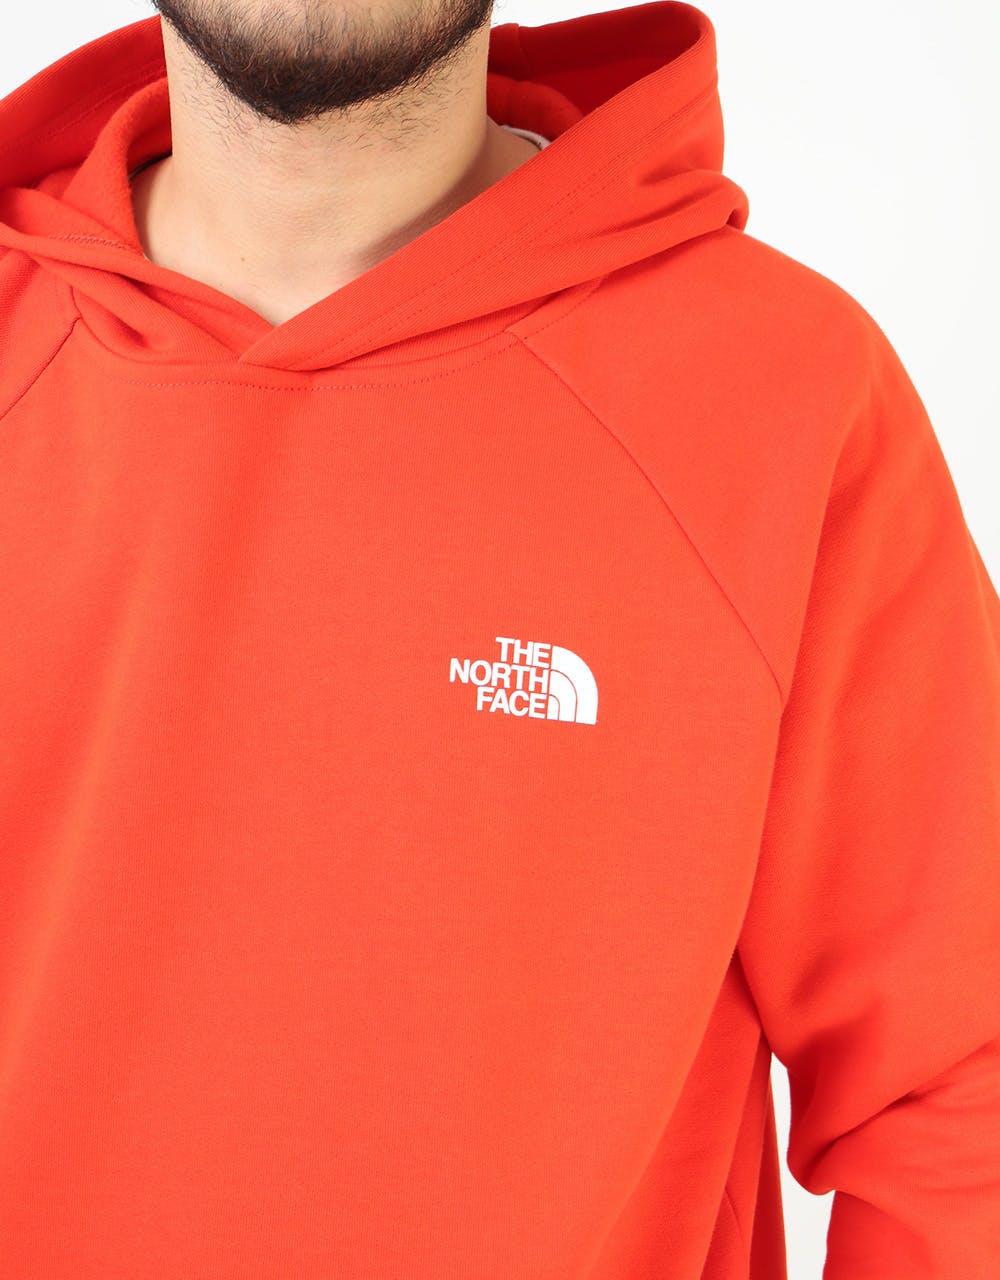 The North Face Raglan Red Box Pullover Hoodie - Fiery Red